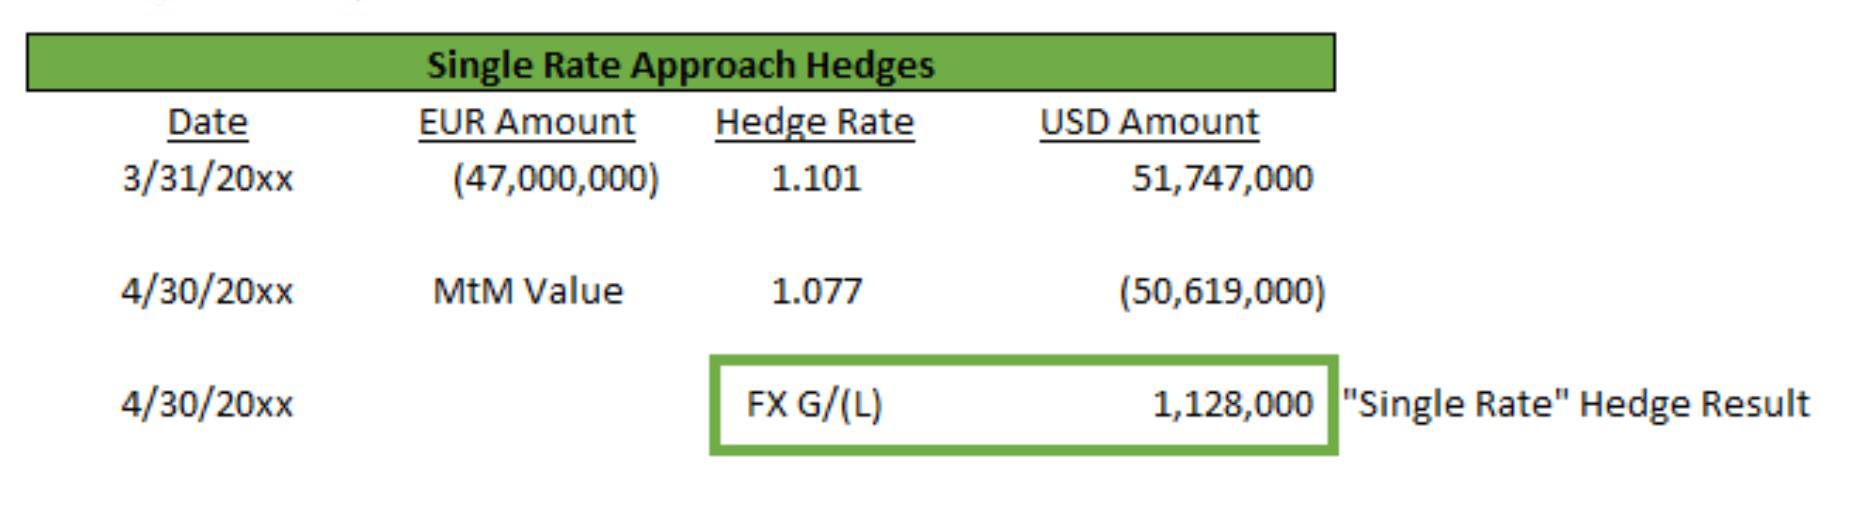 Single Rate Hedges